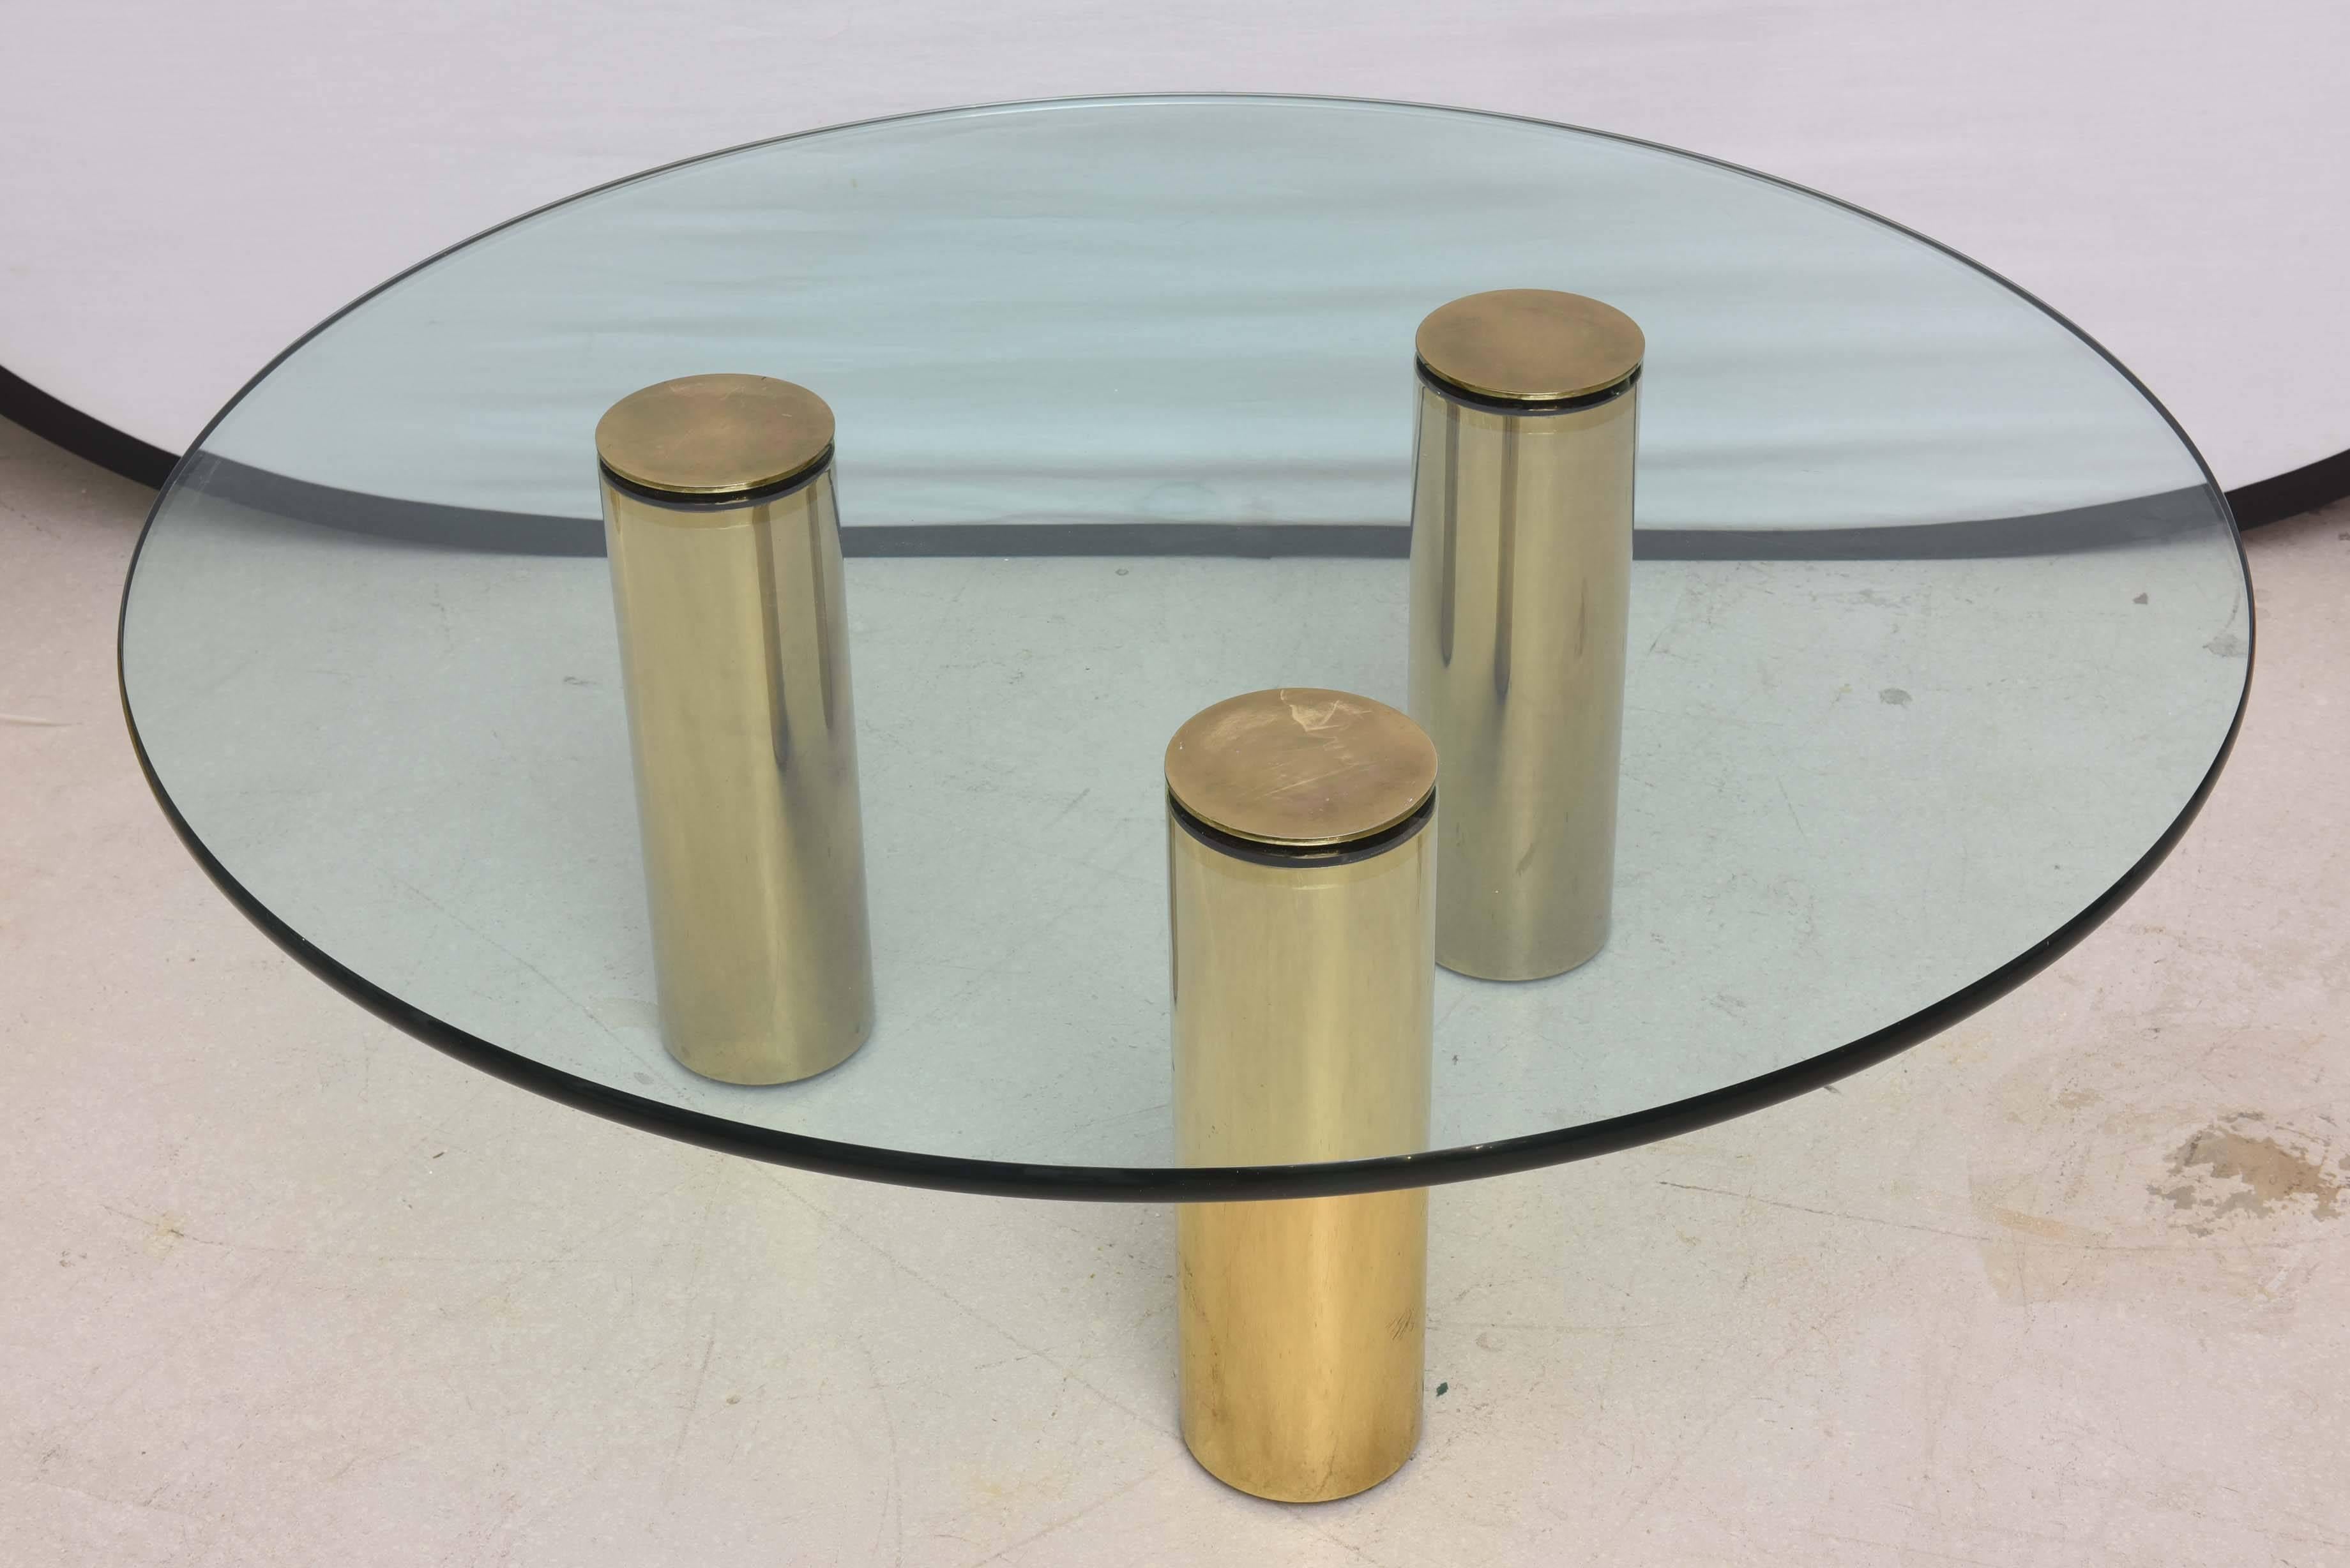 Geometric cocktail table with three tubular brass legs and circular glass top.